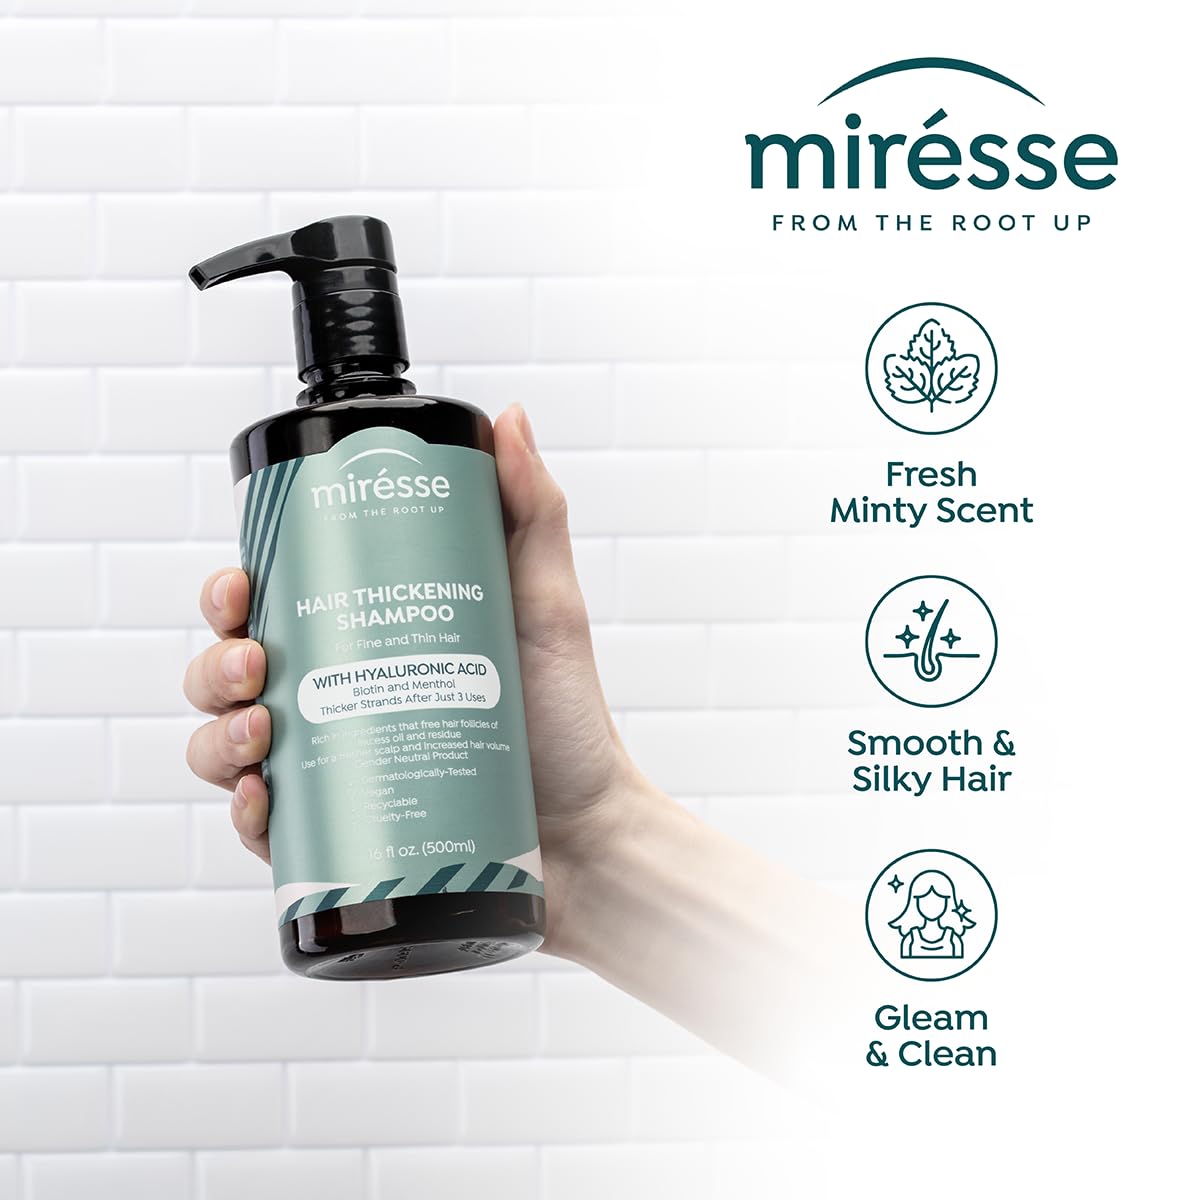 MIRESSE Thickening Shampoo and Hydrating Conditioner Set w/ Hyaluronic Acid, Biotin & Menthol For Men & Women - For Fine Thin Hair. Clinically Proven Thicker Strands on Continuous Use 16.9oz (500ml)x2